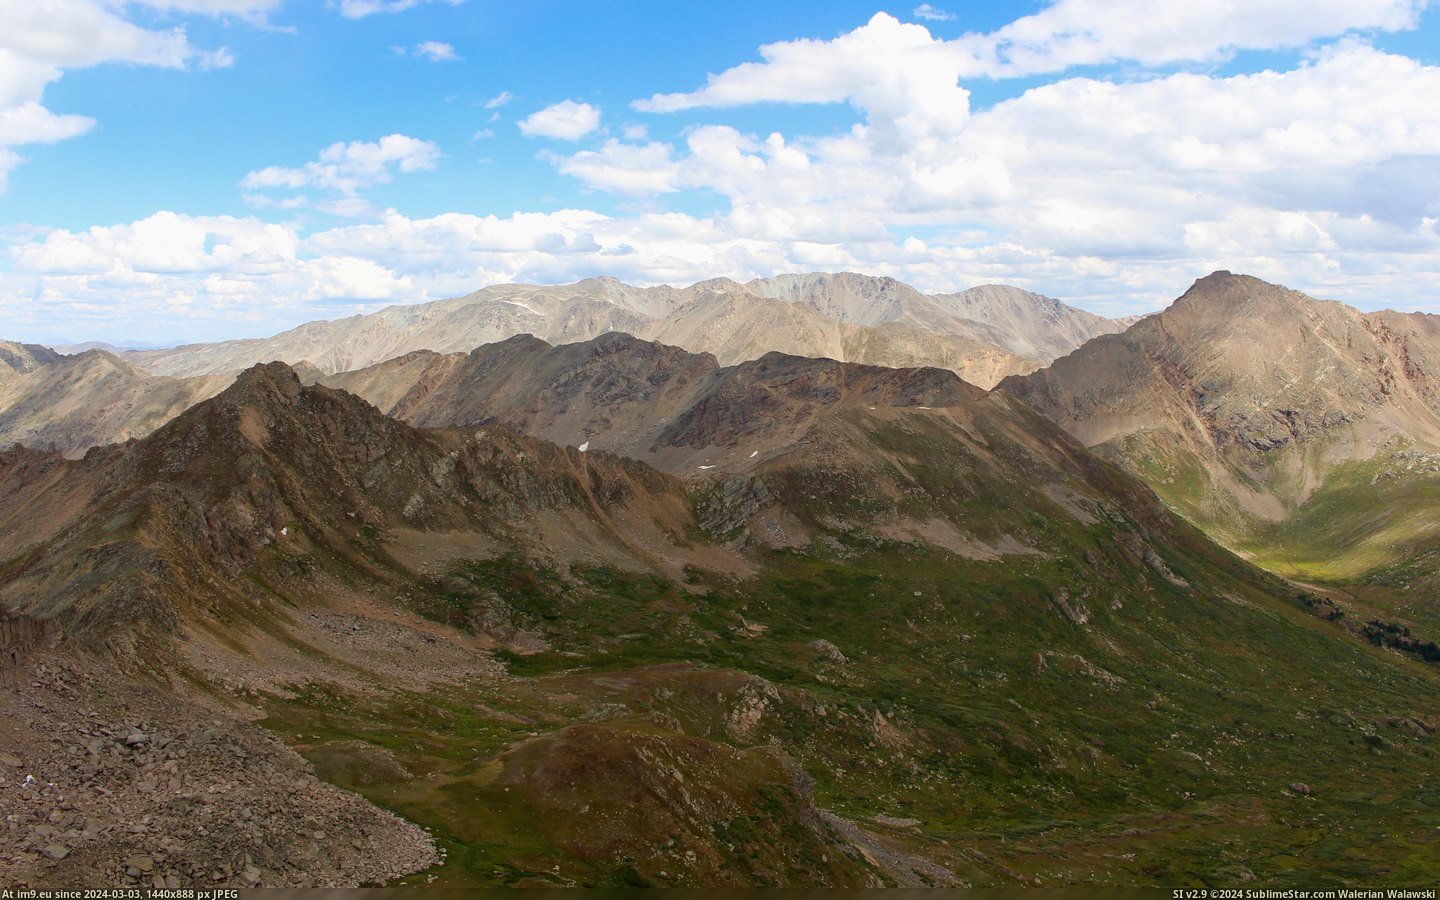 #Colorado #Peaks #Continental #Divide #Tundra #Alpine #Rockies [Earthporn] Craggy peaks and alpine tundra of the Colorado Rockies from the Continental Divide  [4637x2871] Pic. (Obraz z album My r/EARTHPORN favs))